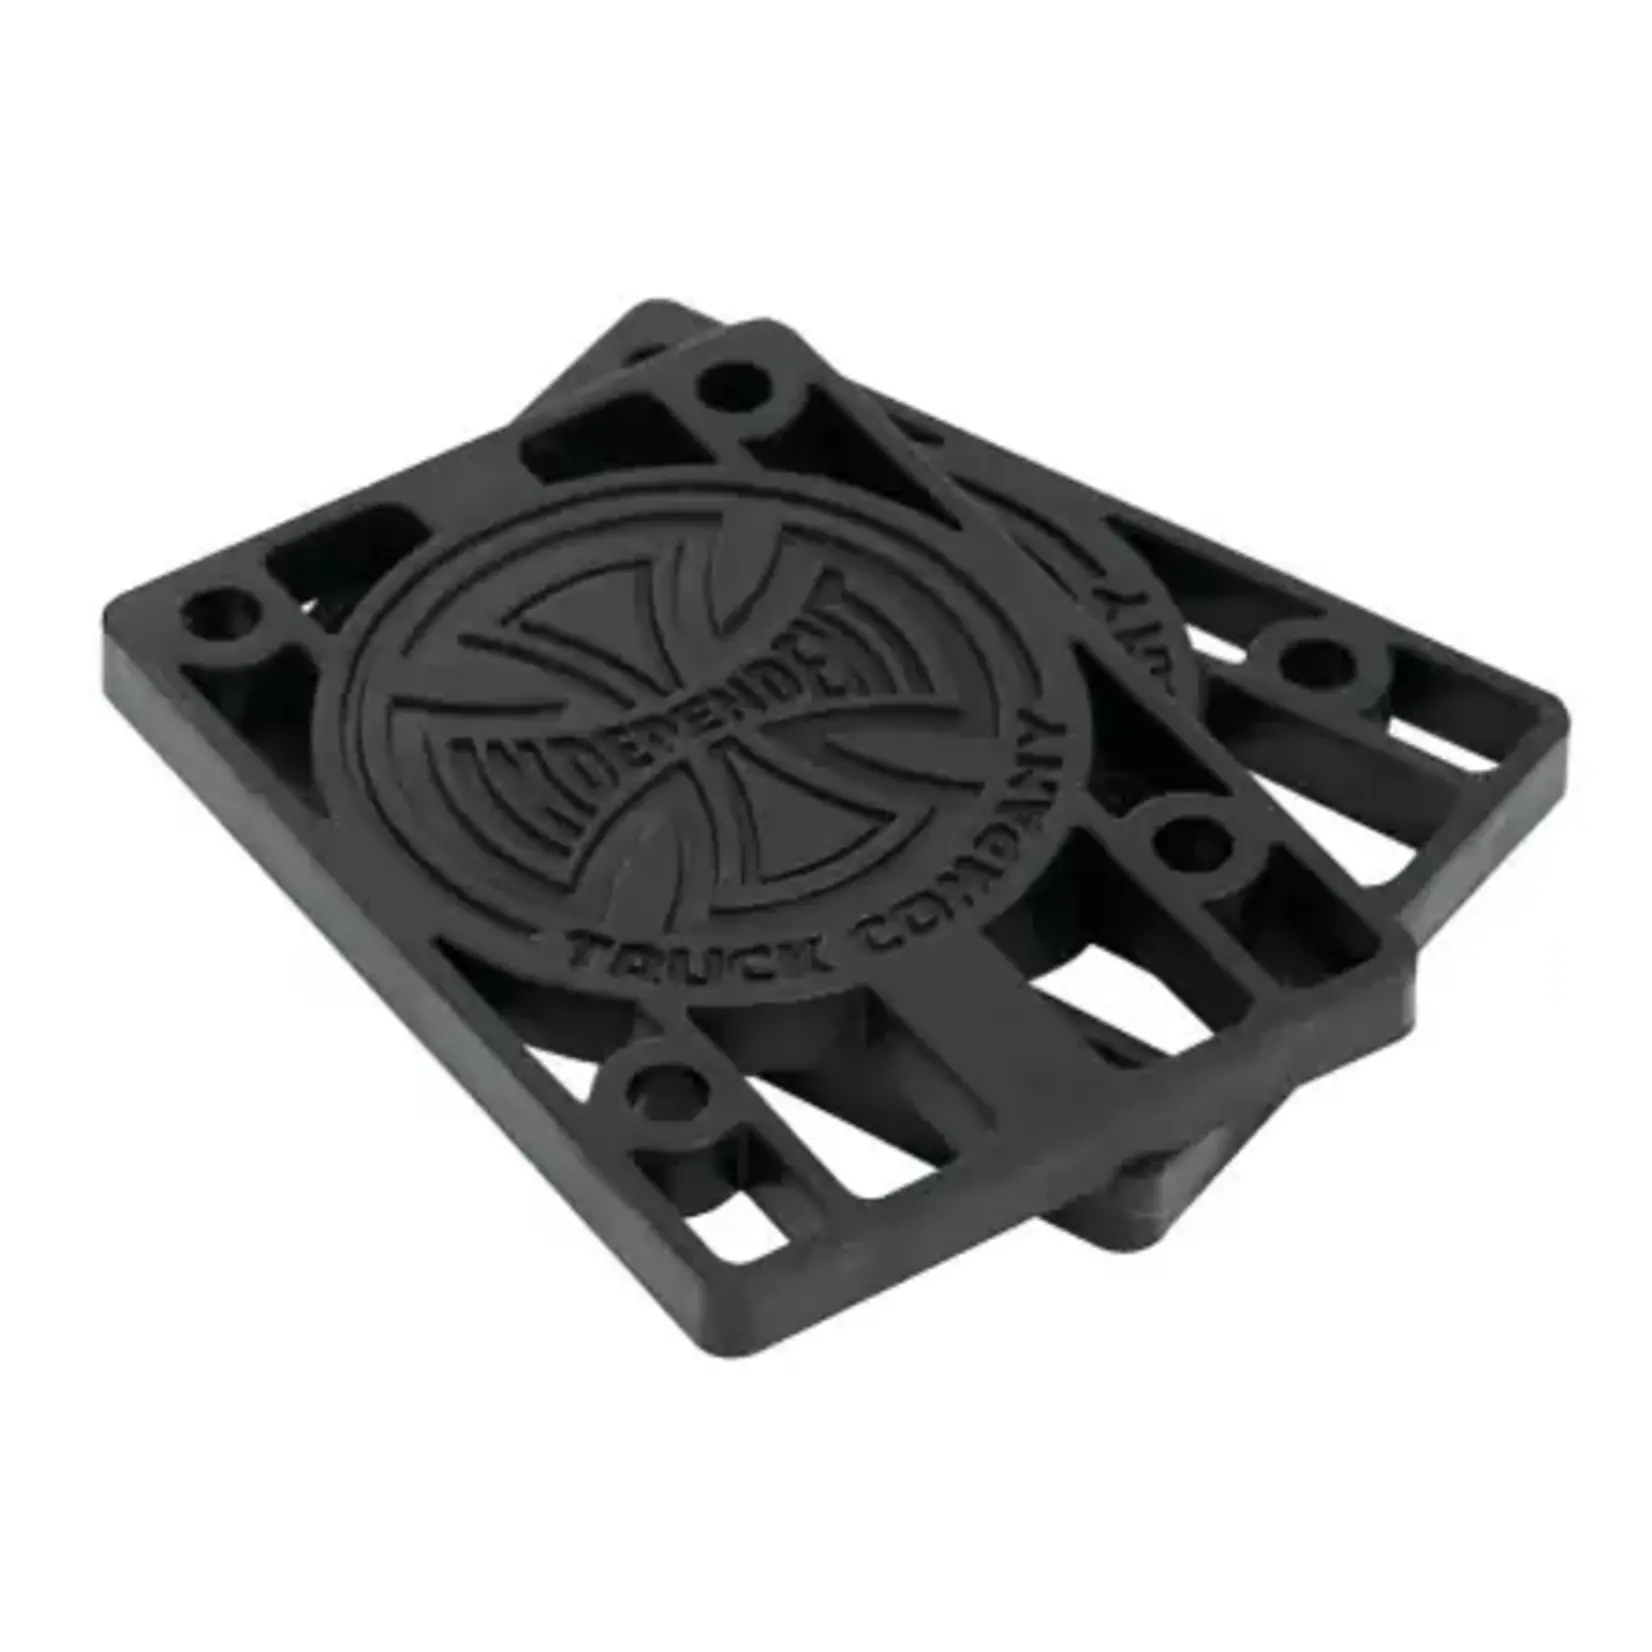 Independent Genuine Parts 1/4" Risers